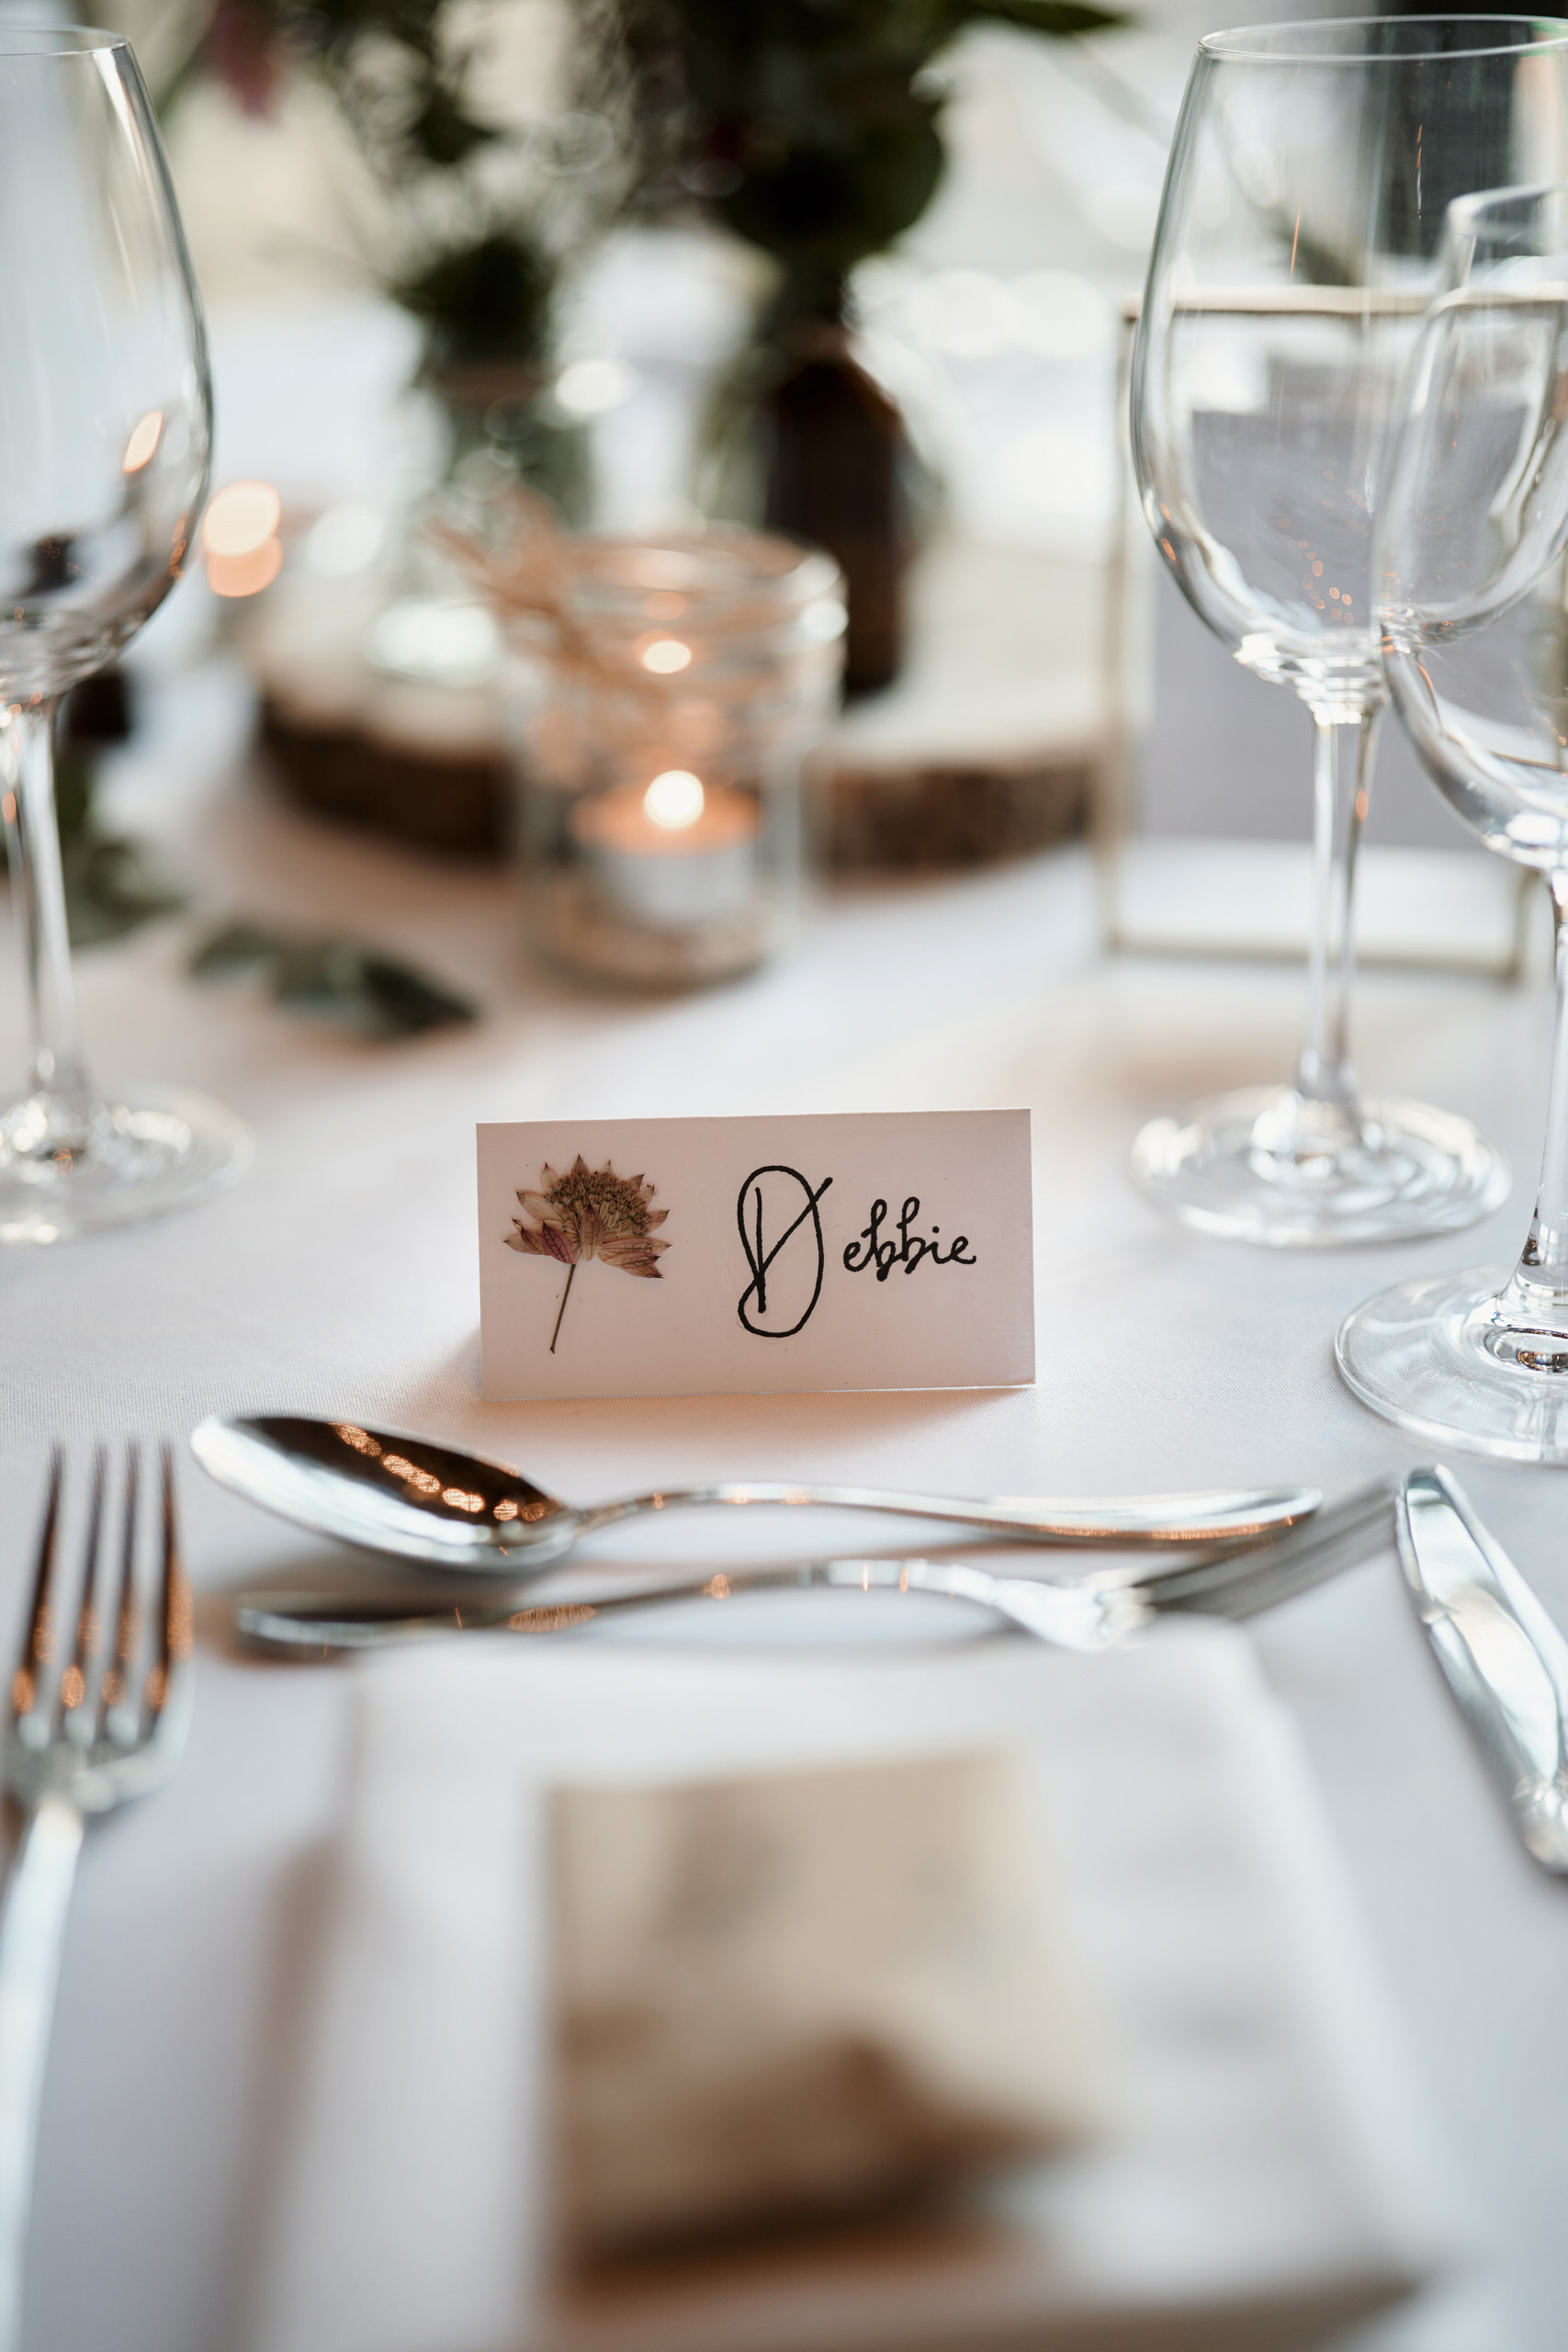 A dinner table setup that includes a name card and wine glasses.